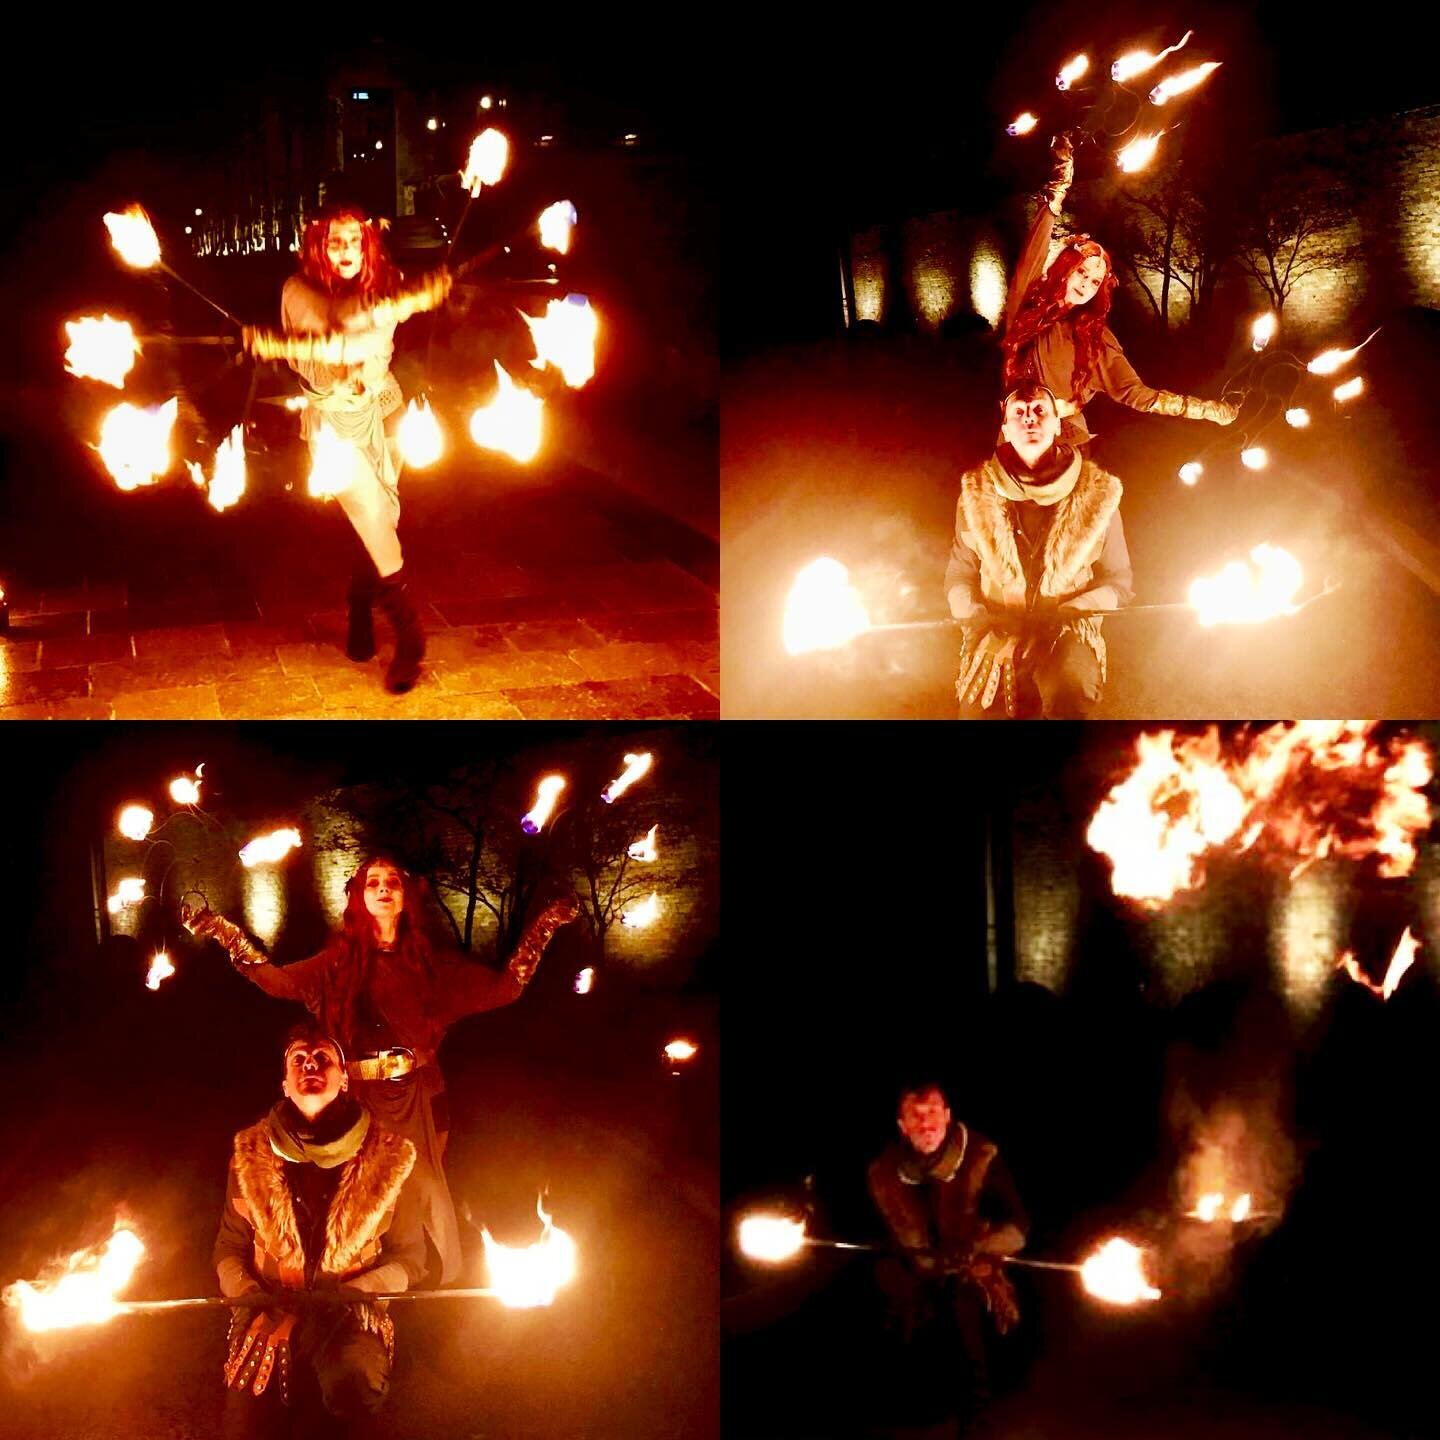 #fire #drums #dance #music 

A delightful few days was had, working with @michellerago and her superb team for a very special private  programme across @theadaremanor @thedunraven this Easter. 

Our thanks to the wonderful #SEAentertainment #acts who